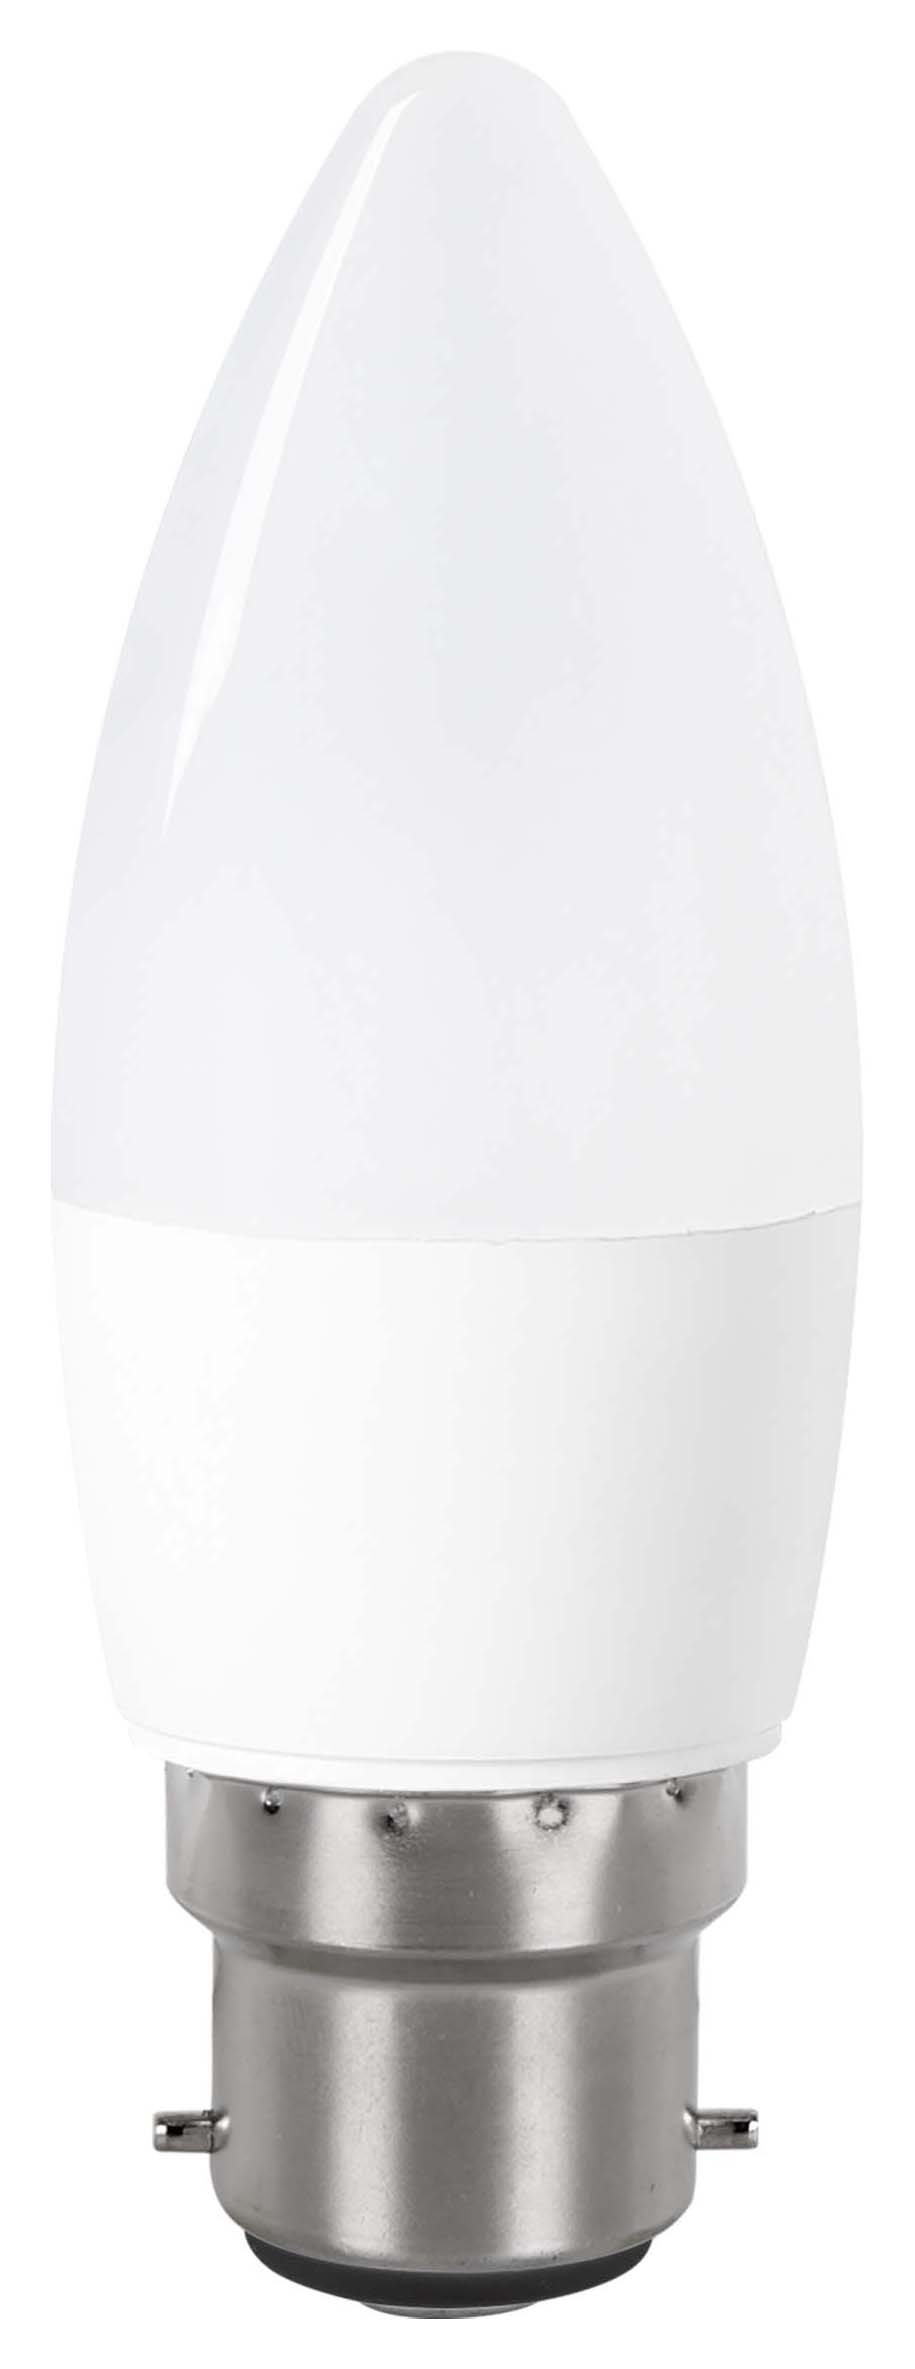 Image of Wickes Non-dimmable Opal LED B22 Candle 4.9W Warm White Light Bulb - pack of 4